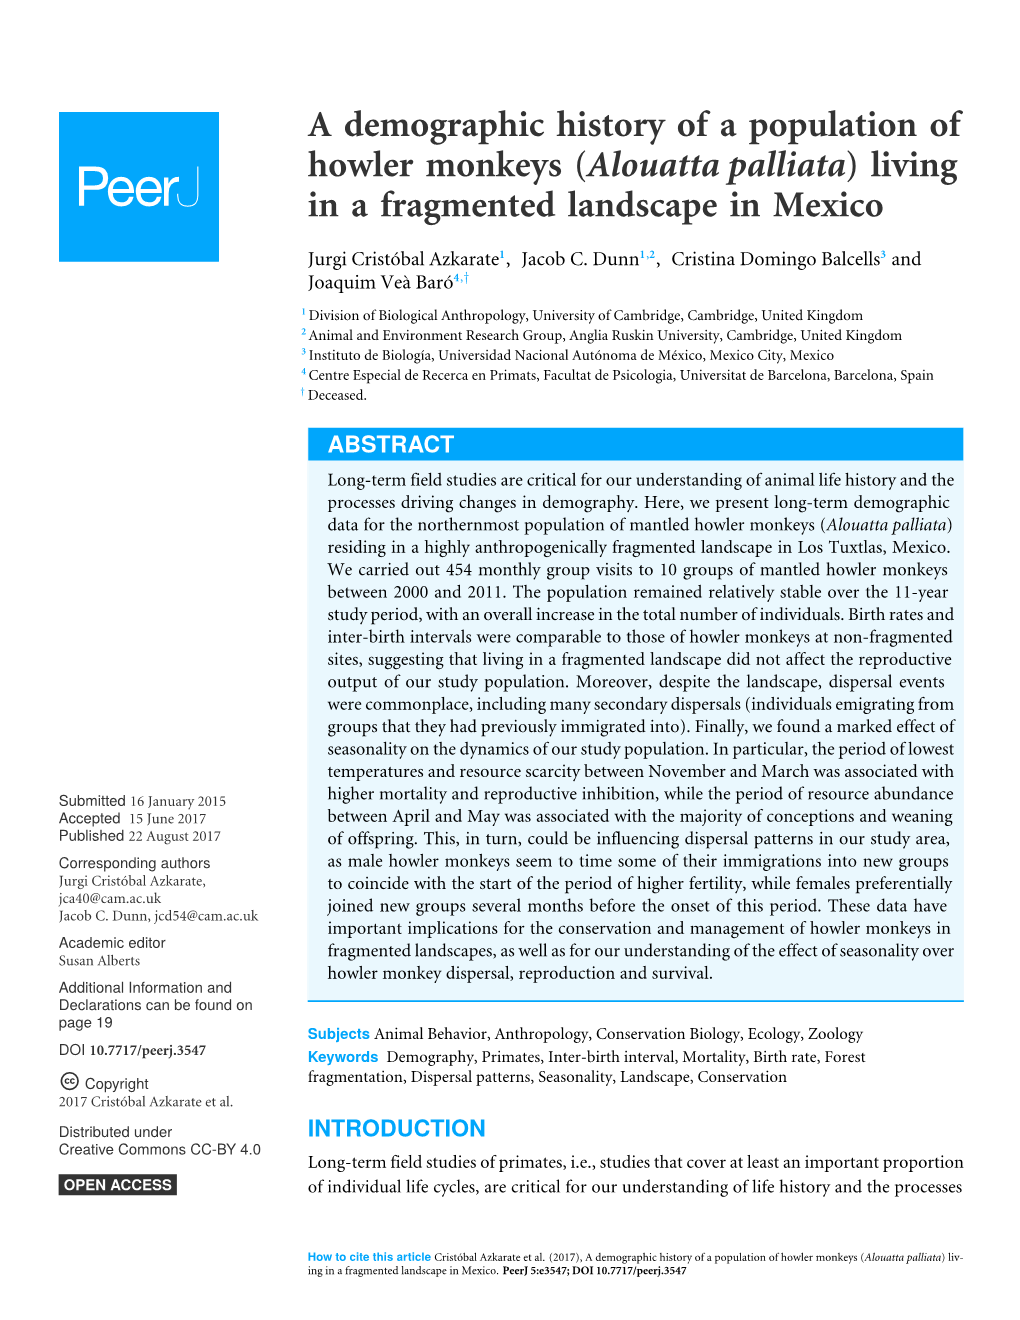 A Demographic History of a Population of Howler Monkeys (Alouatta Palliata) Living in a Fragmented Landscape in Mexico